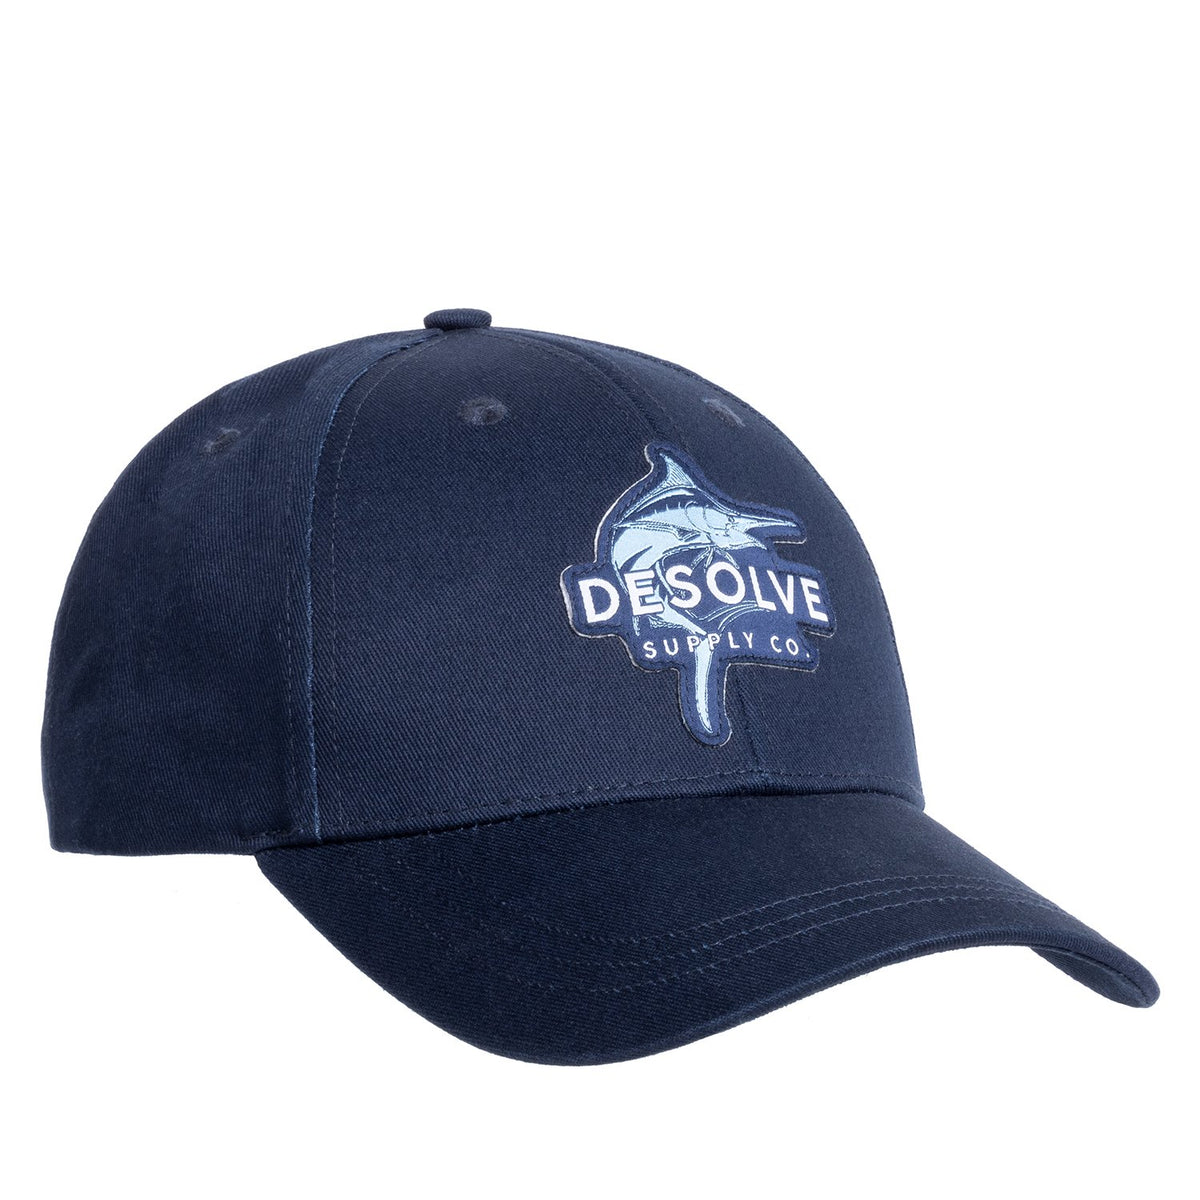 Desolve Supply Co, Marlin Cap, 100% Poly Cotton, One Size Fits Most, Fishing Hat, Mens - Desolve Supply Co.